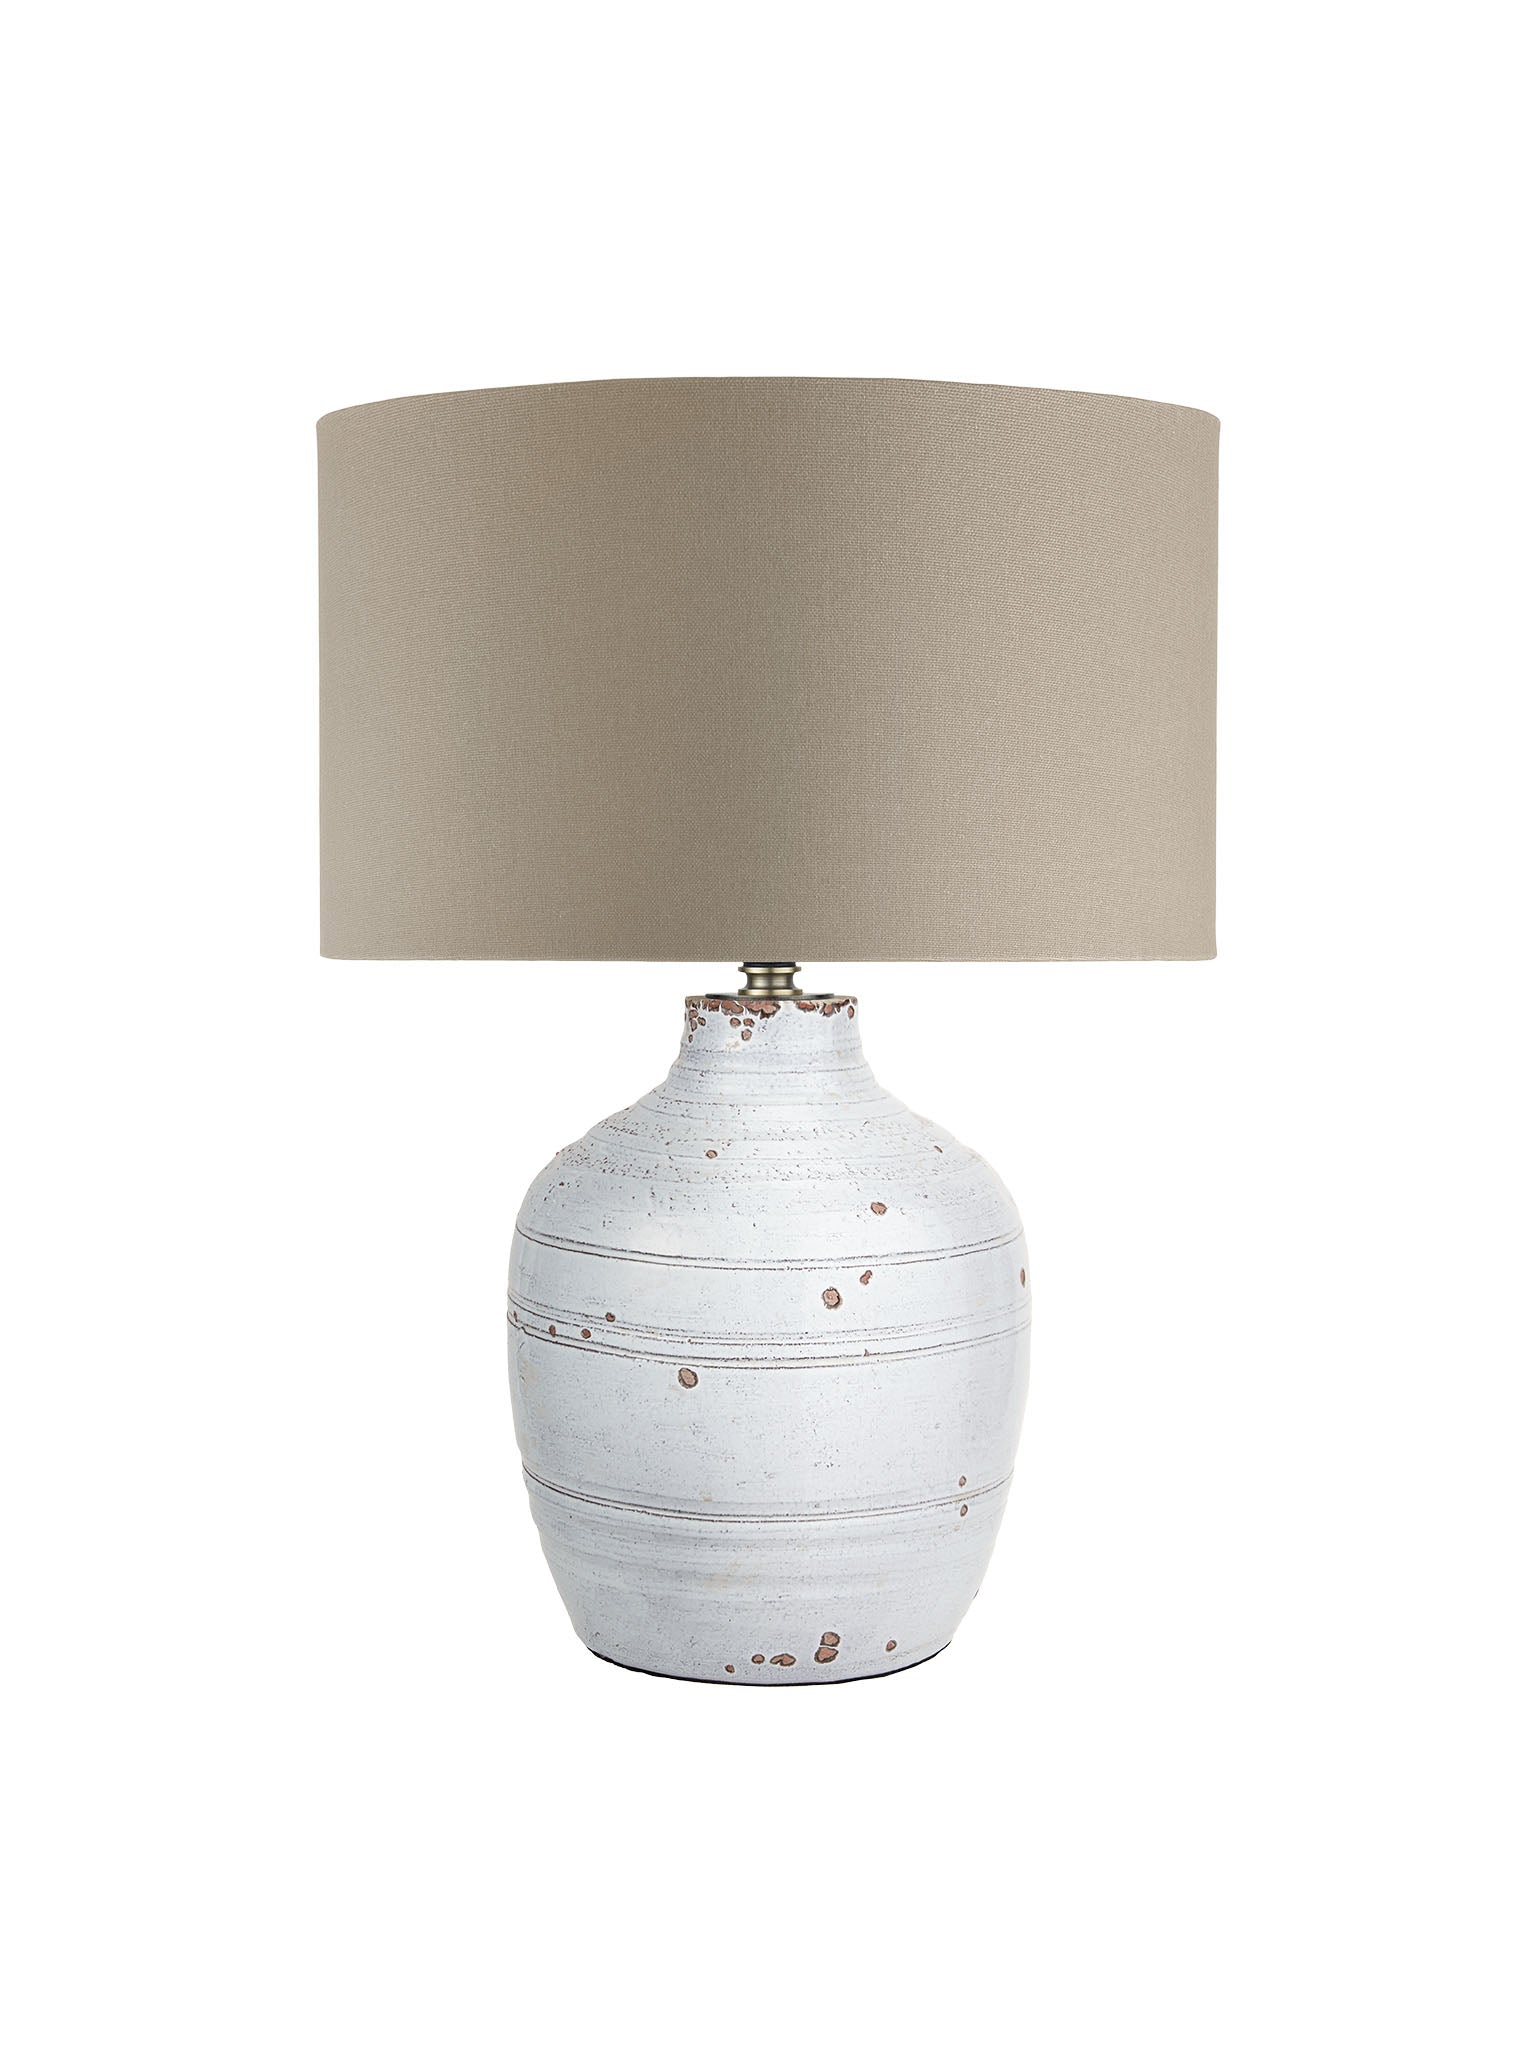 ceramic lamp base with taupe shades